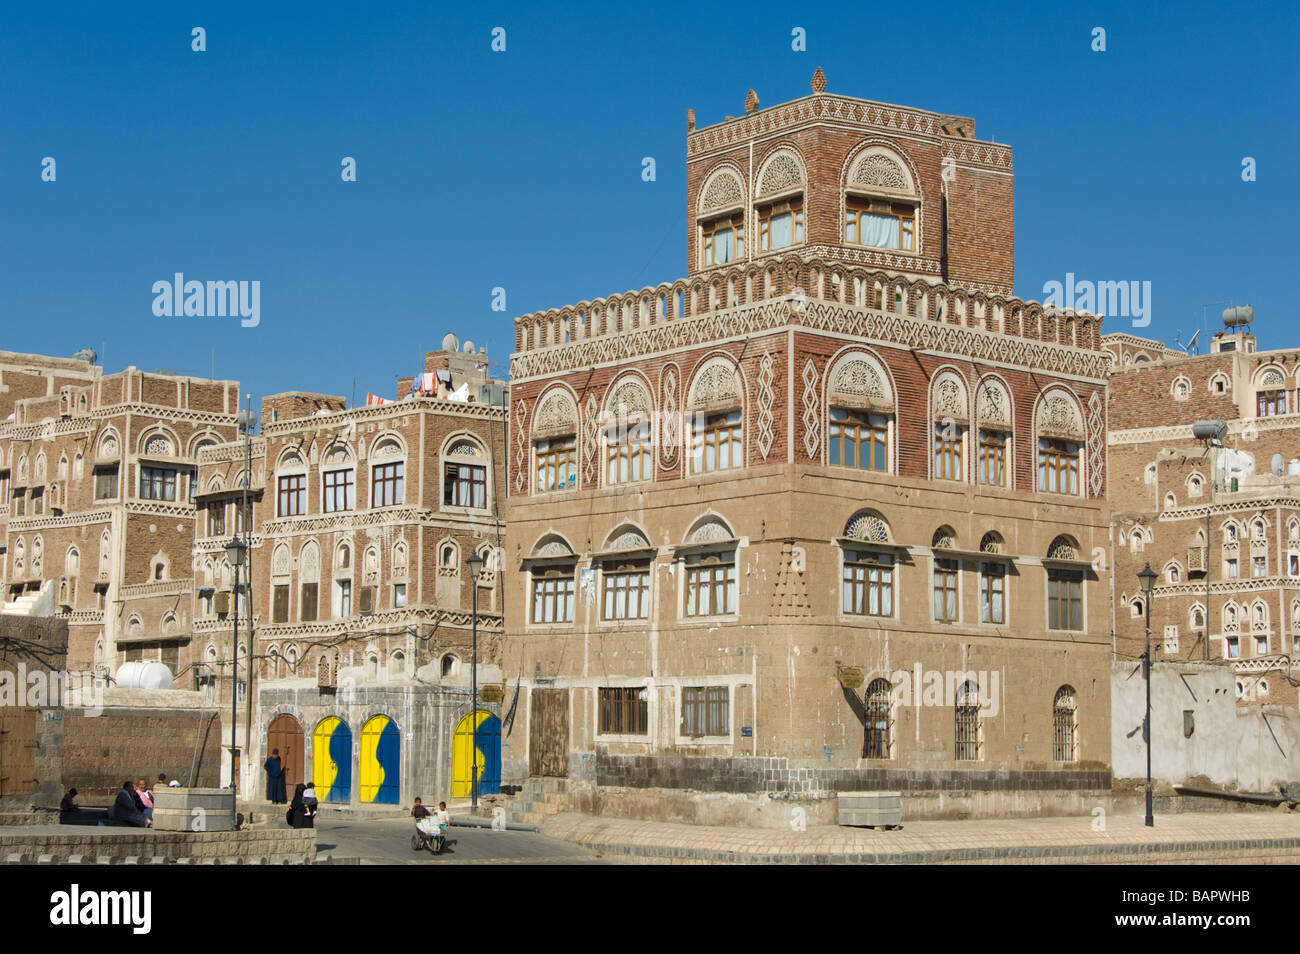 Traditional buildings in the old town district of Sana'a Yemen Stock Photo